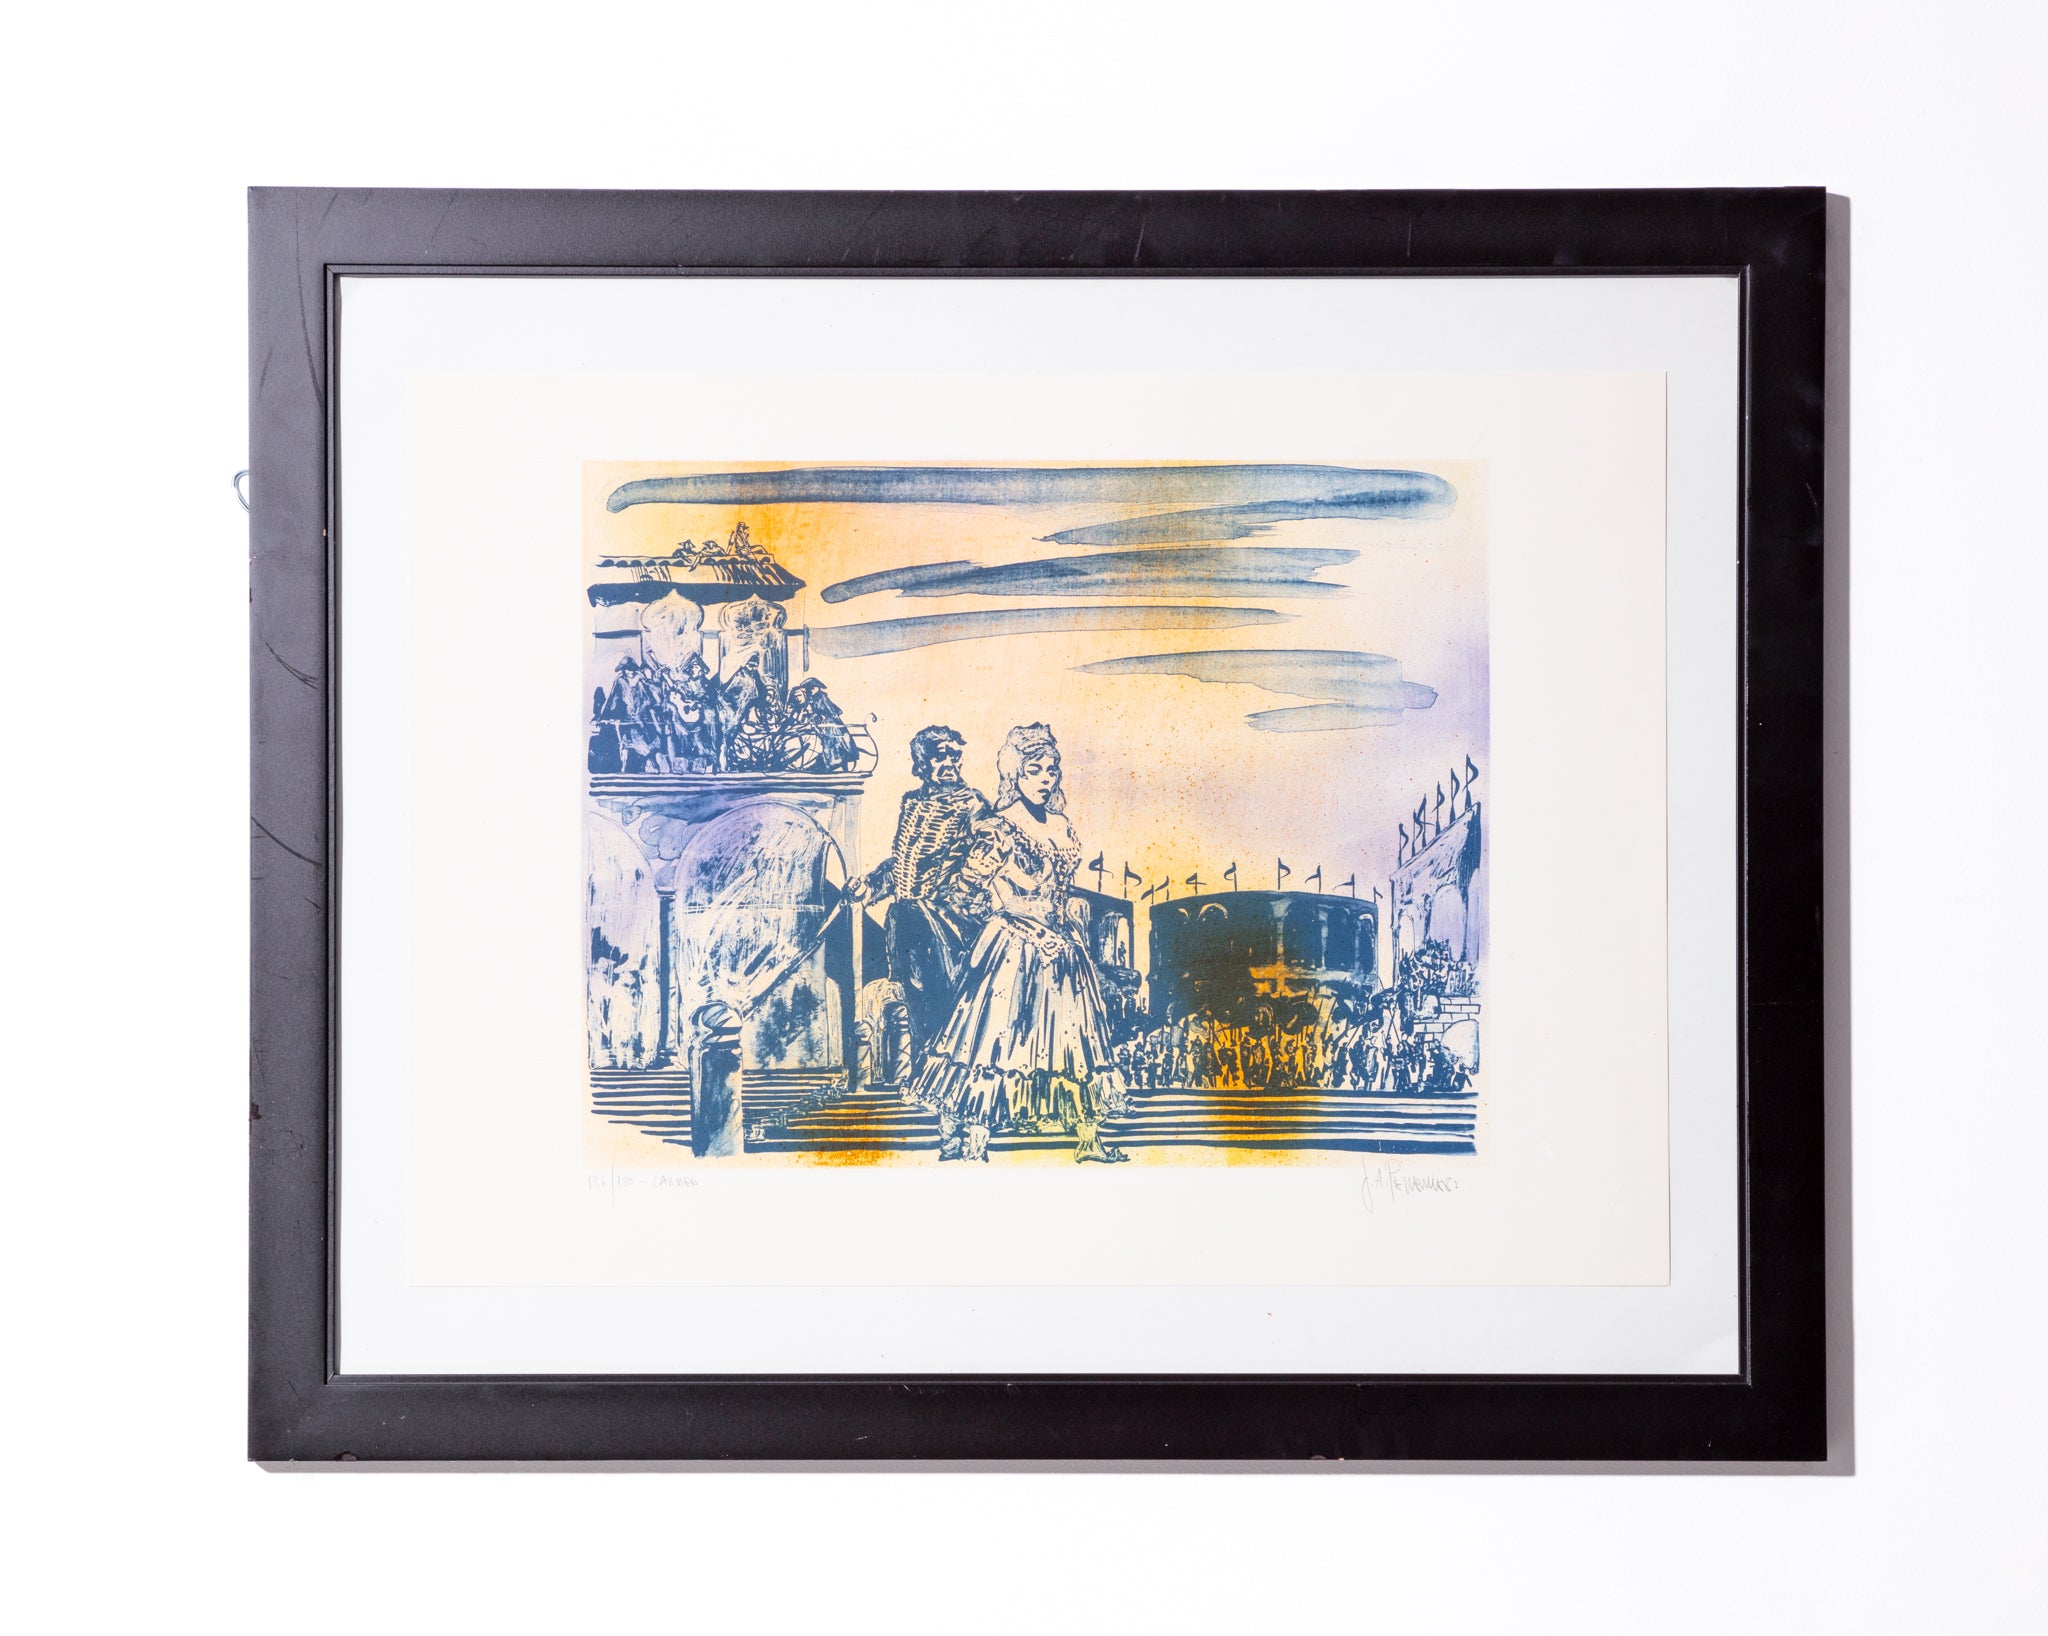 Framed blue and yellow linocut, titled after the opera "Carmen". Hand signed and numbered.